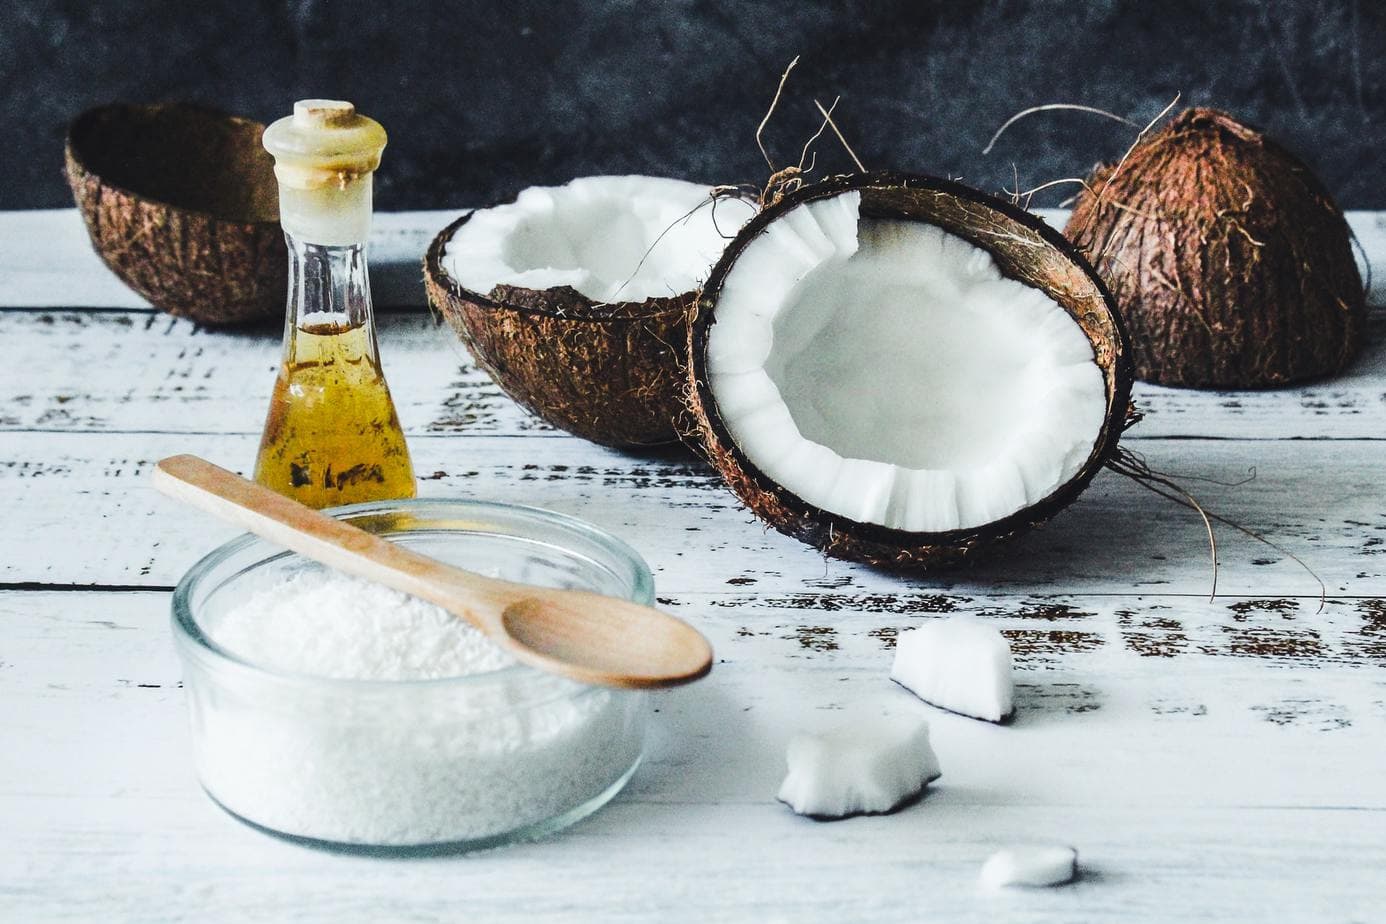 How does coconut oil affect our beauty?